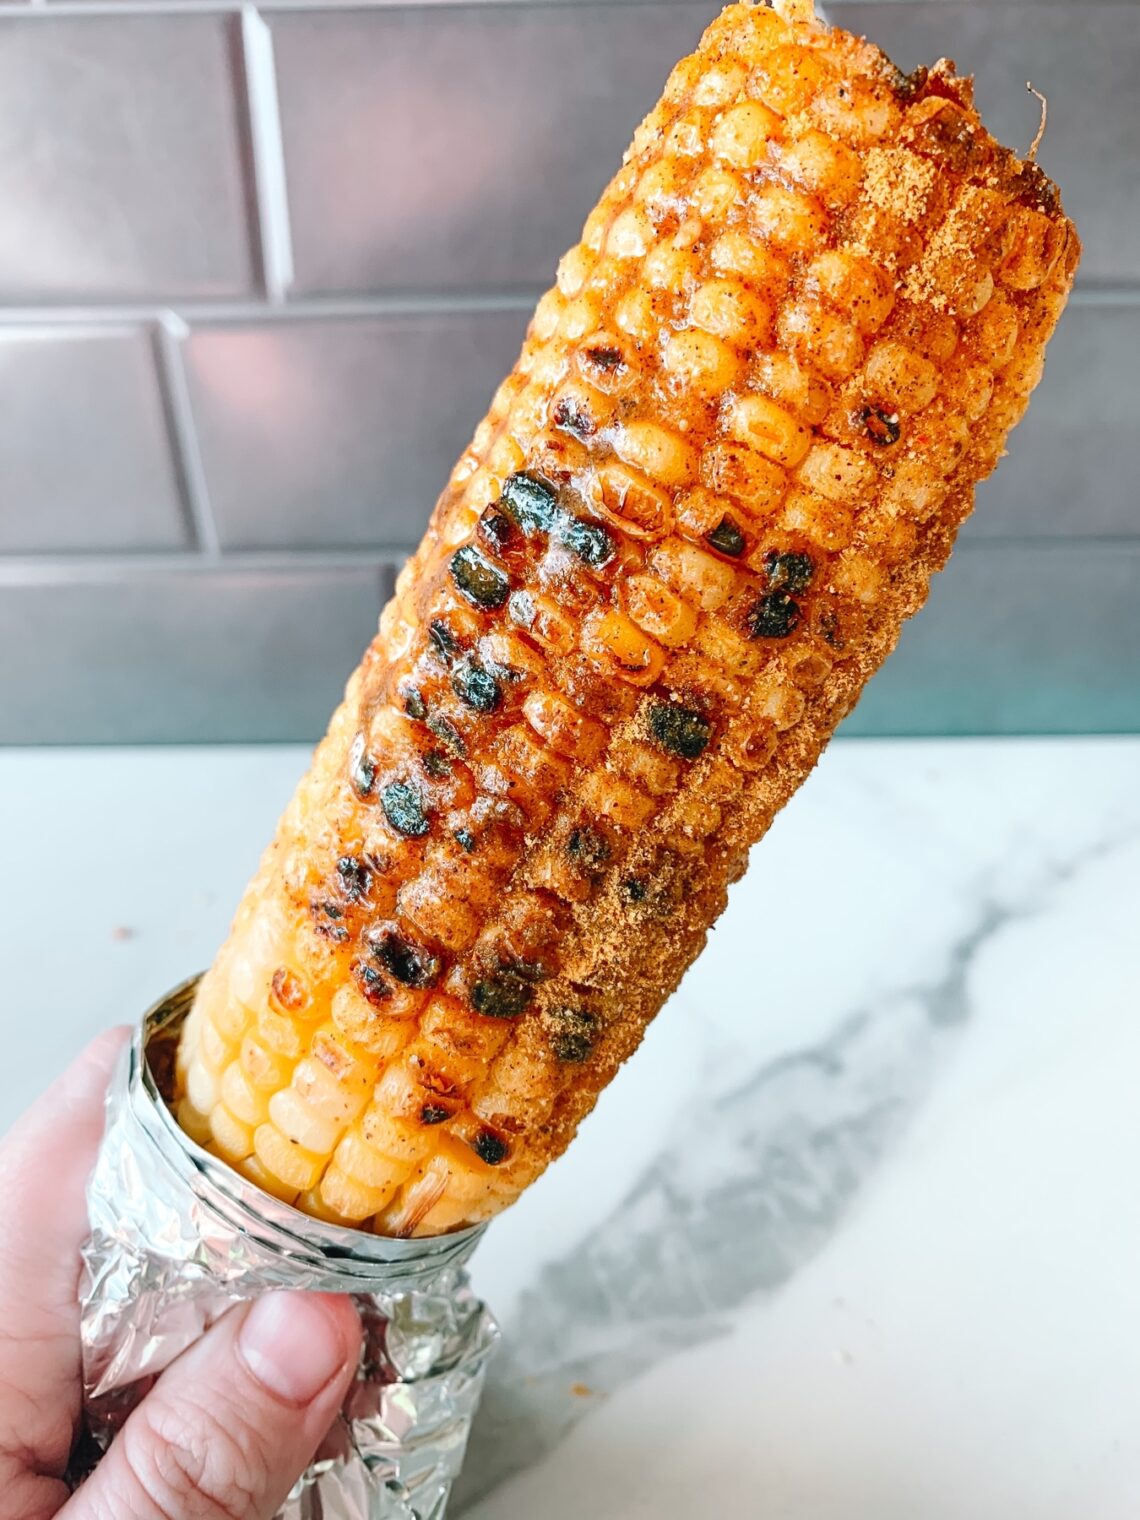 Animal Kingdom's Grilled Curry Corn on the Cob